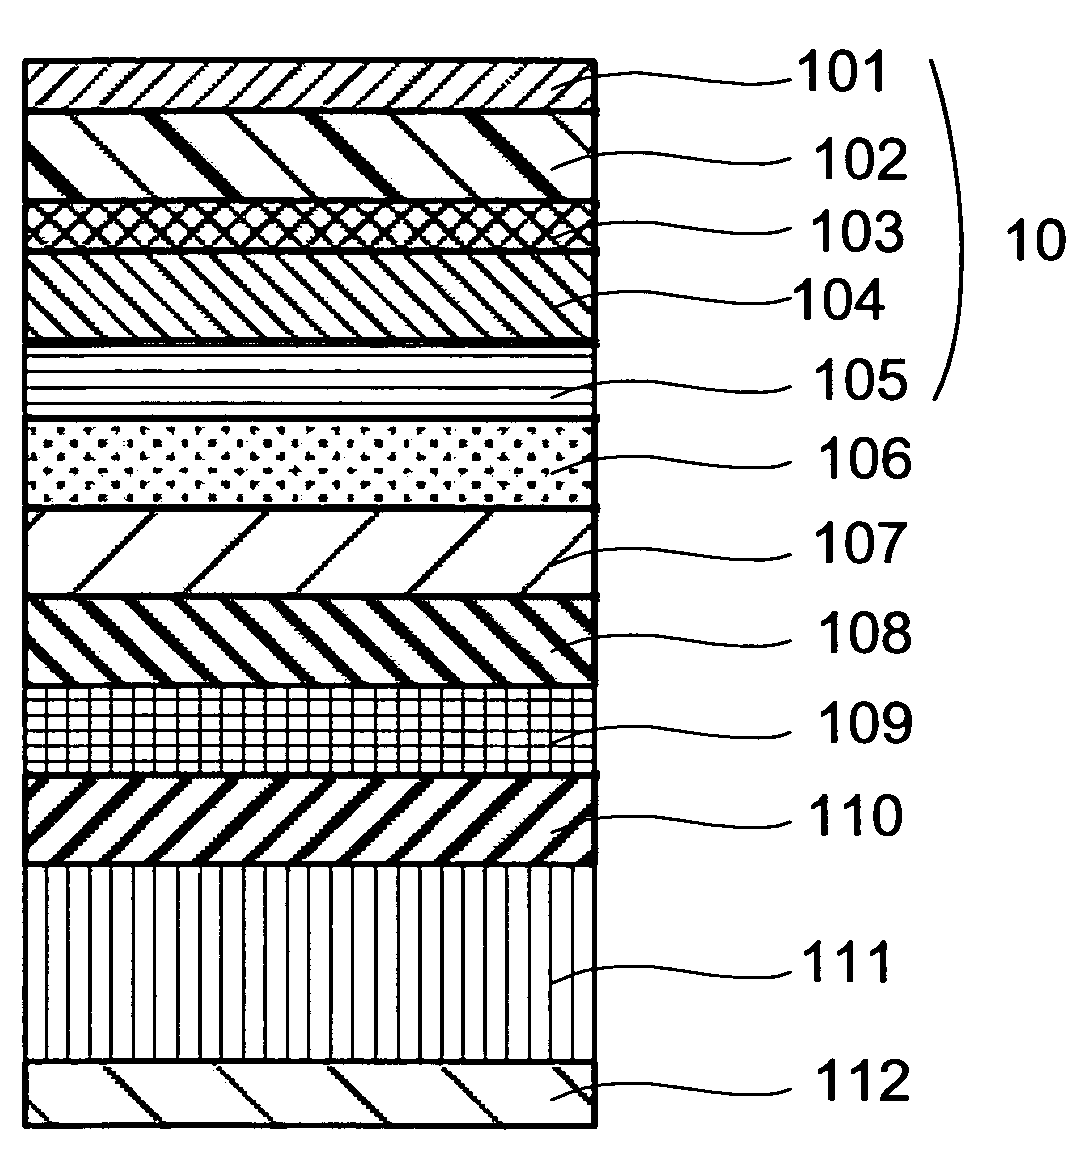 Thermoreversible recording medium, thermoreversible recording label and thermoreversible recording member, and, image processing apparatus and image processing method